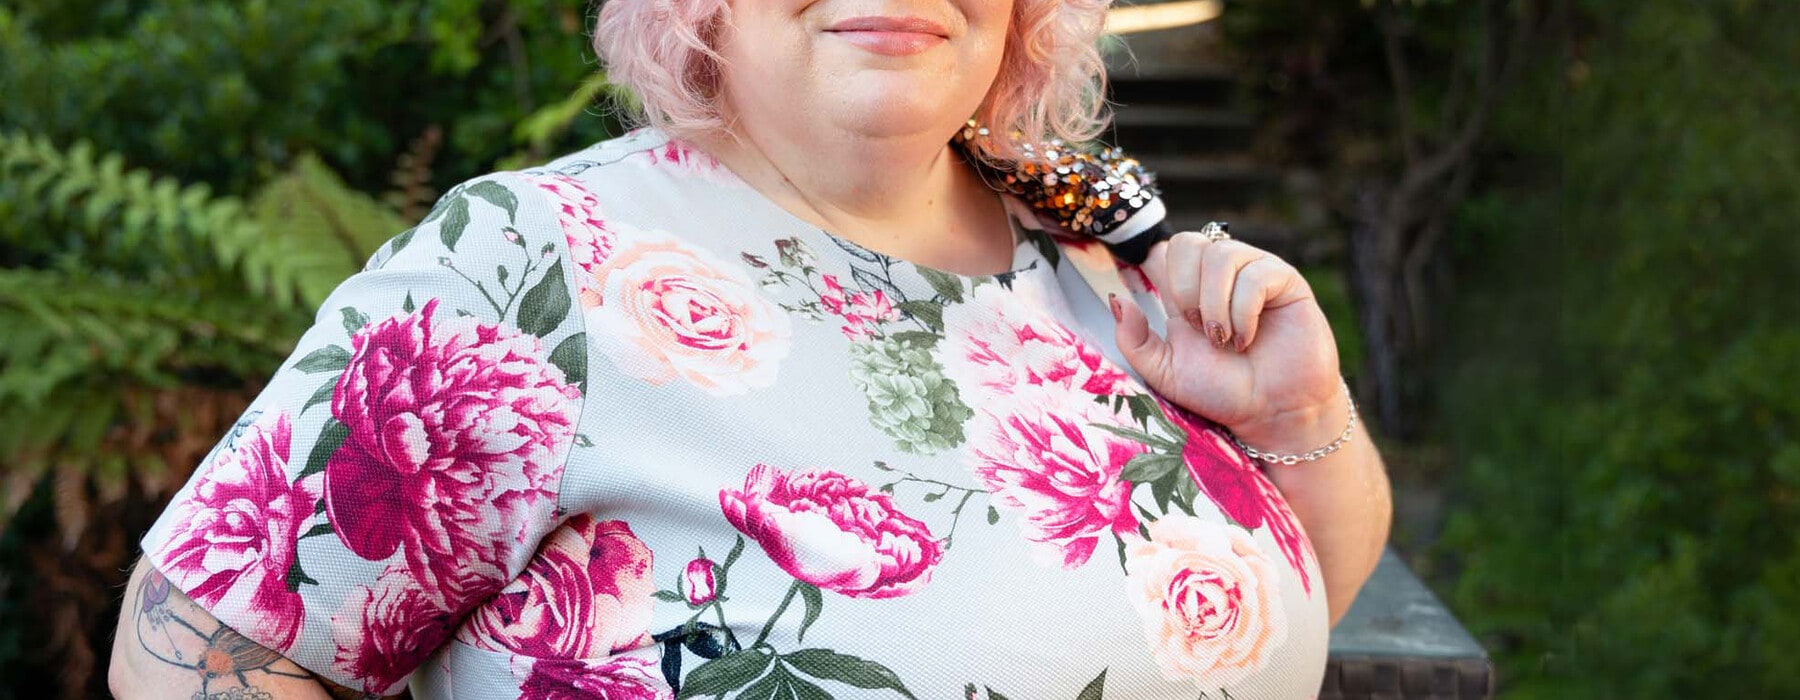 a woman with short pink hair in a floral dress